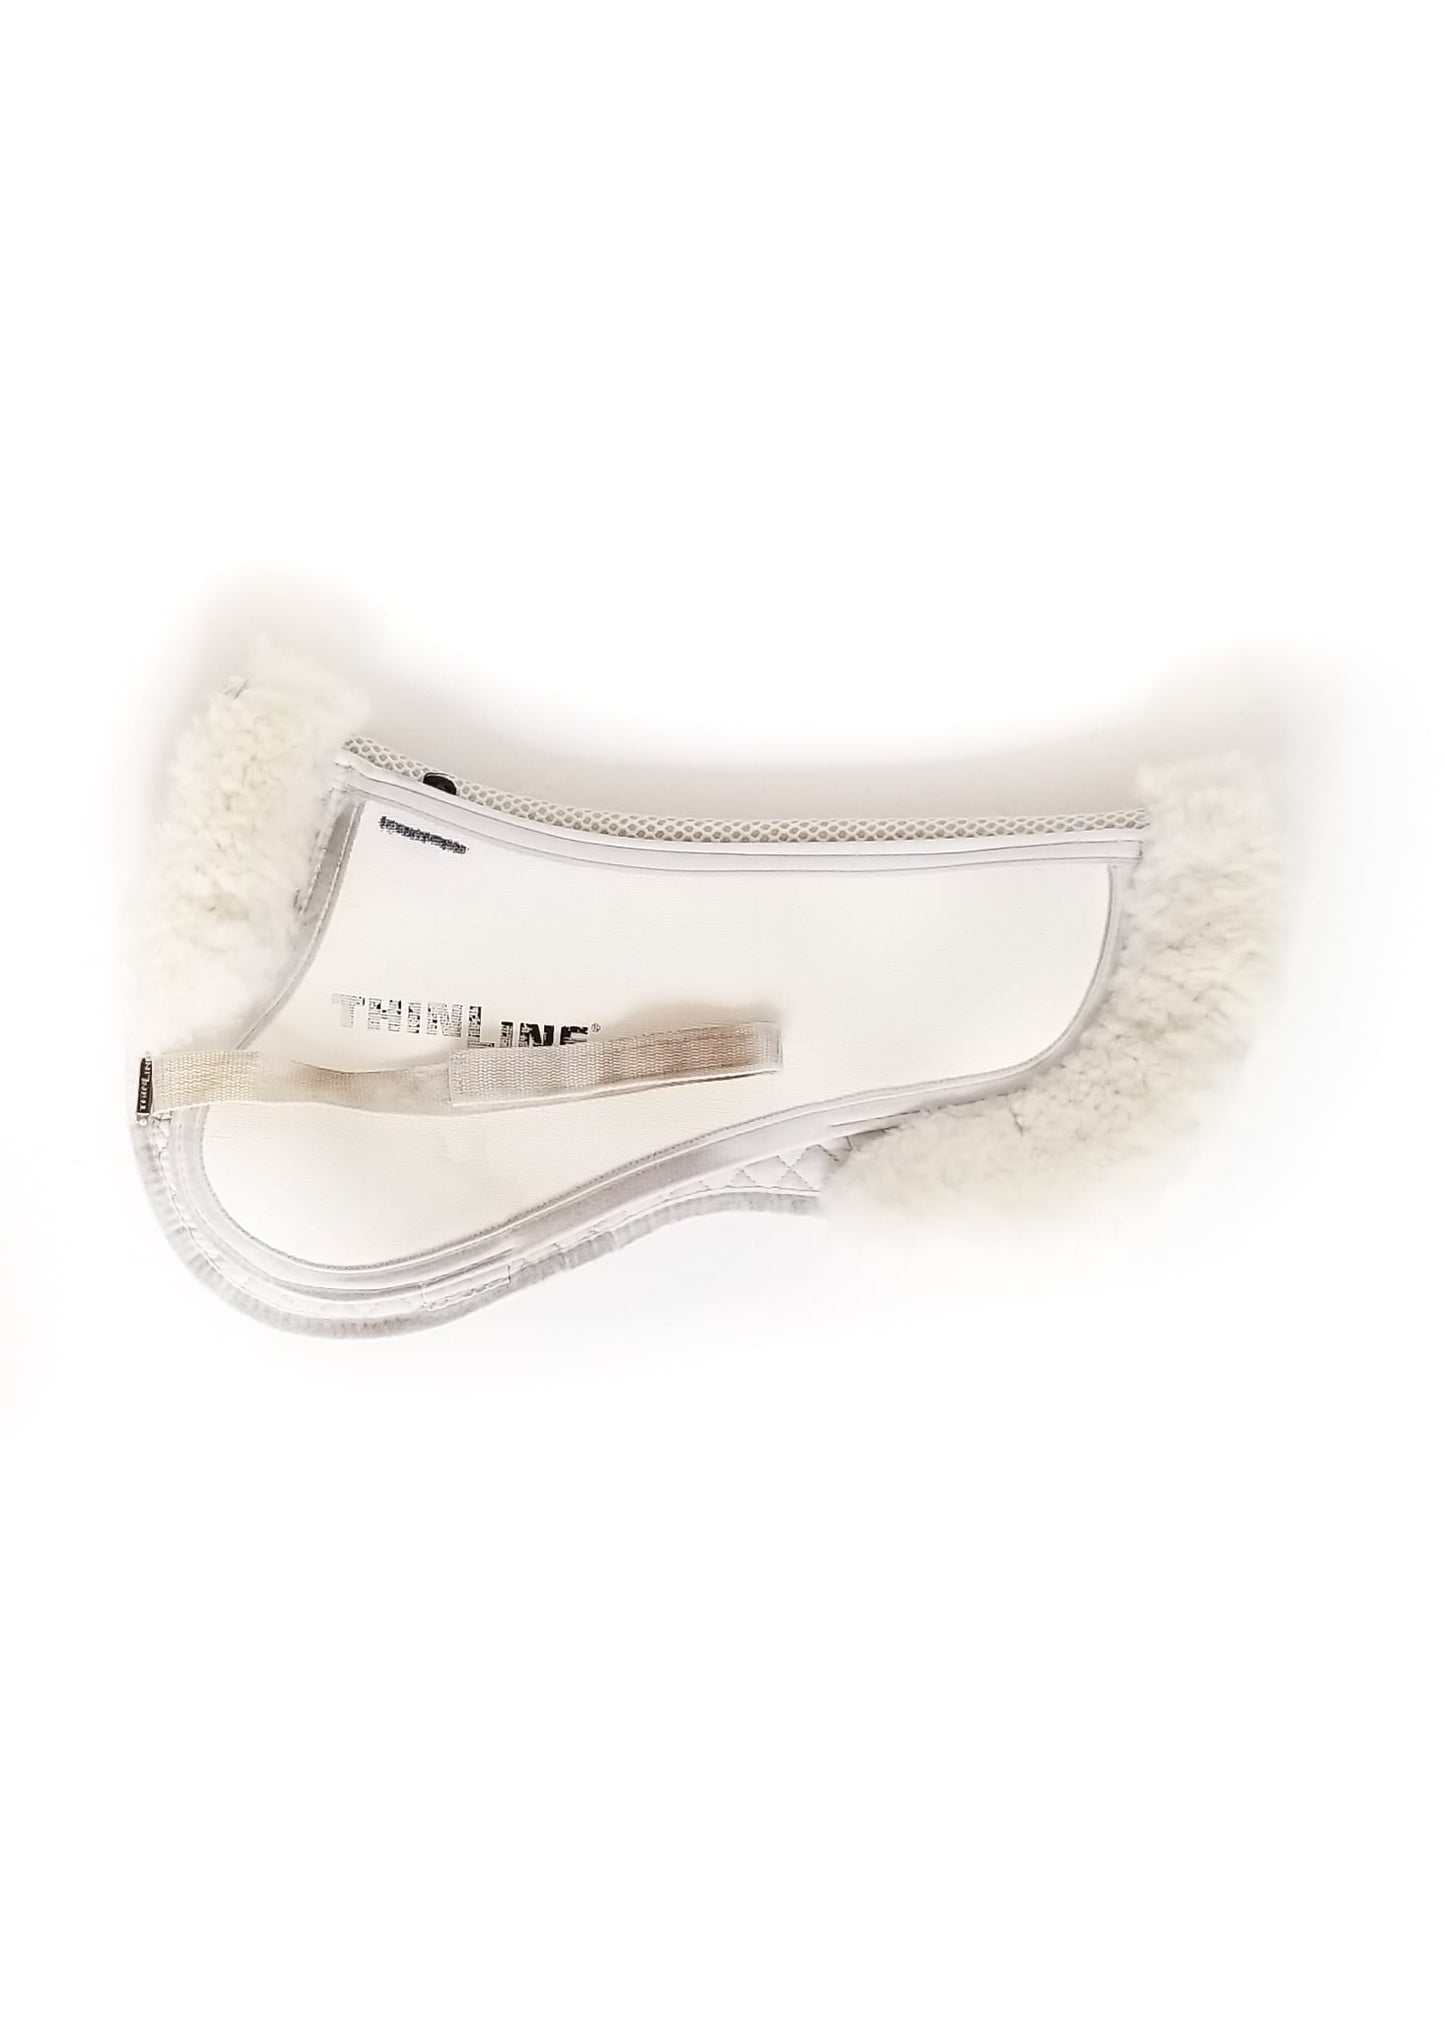 Thinline Trifecta Half Pad with Sheepskin Rolls (Shimable) - White - Small